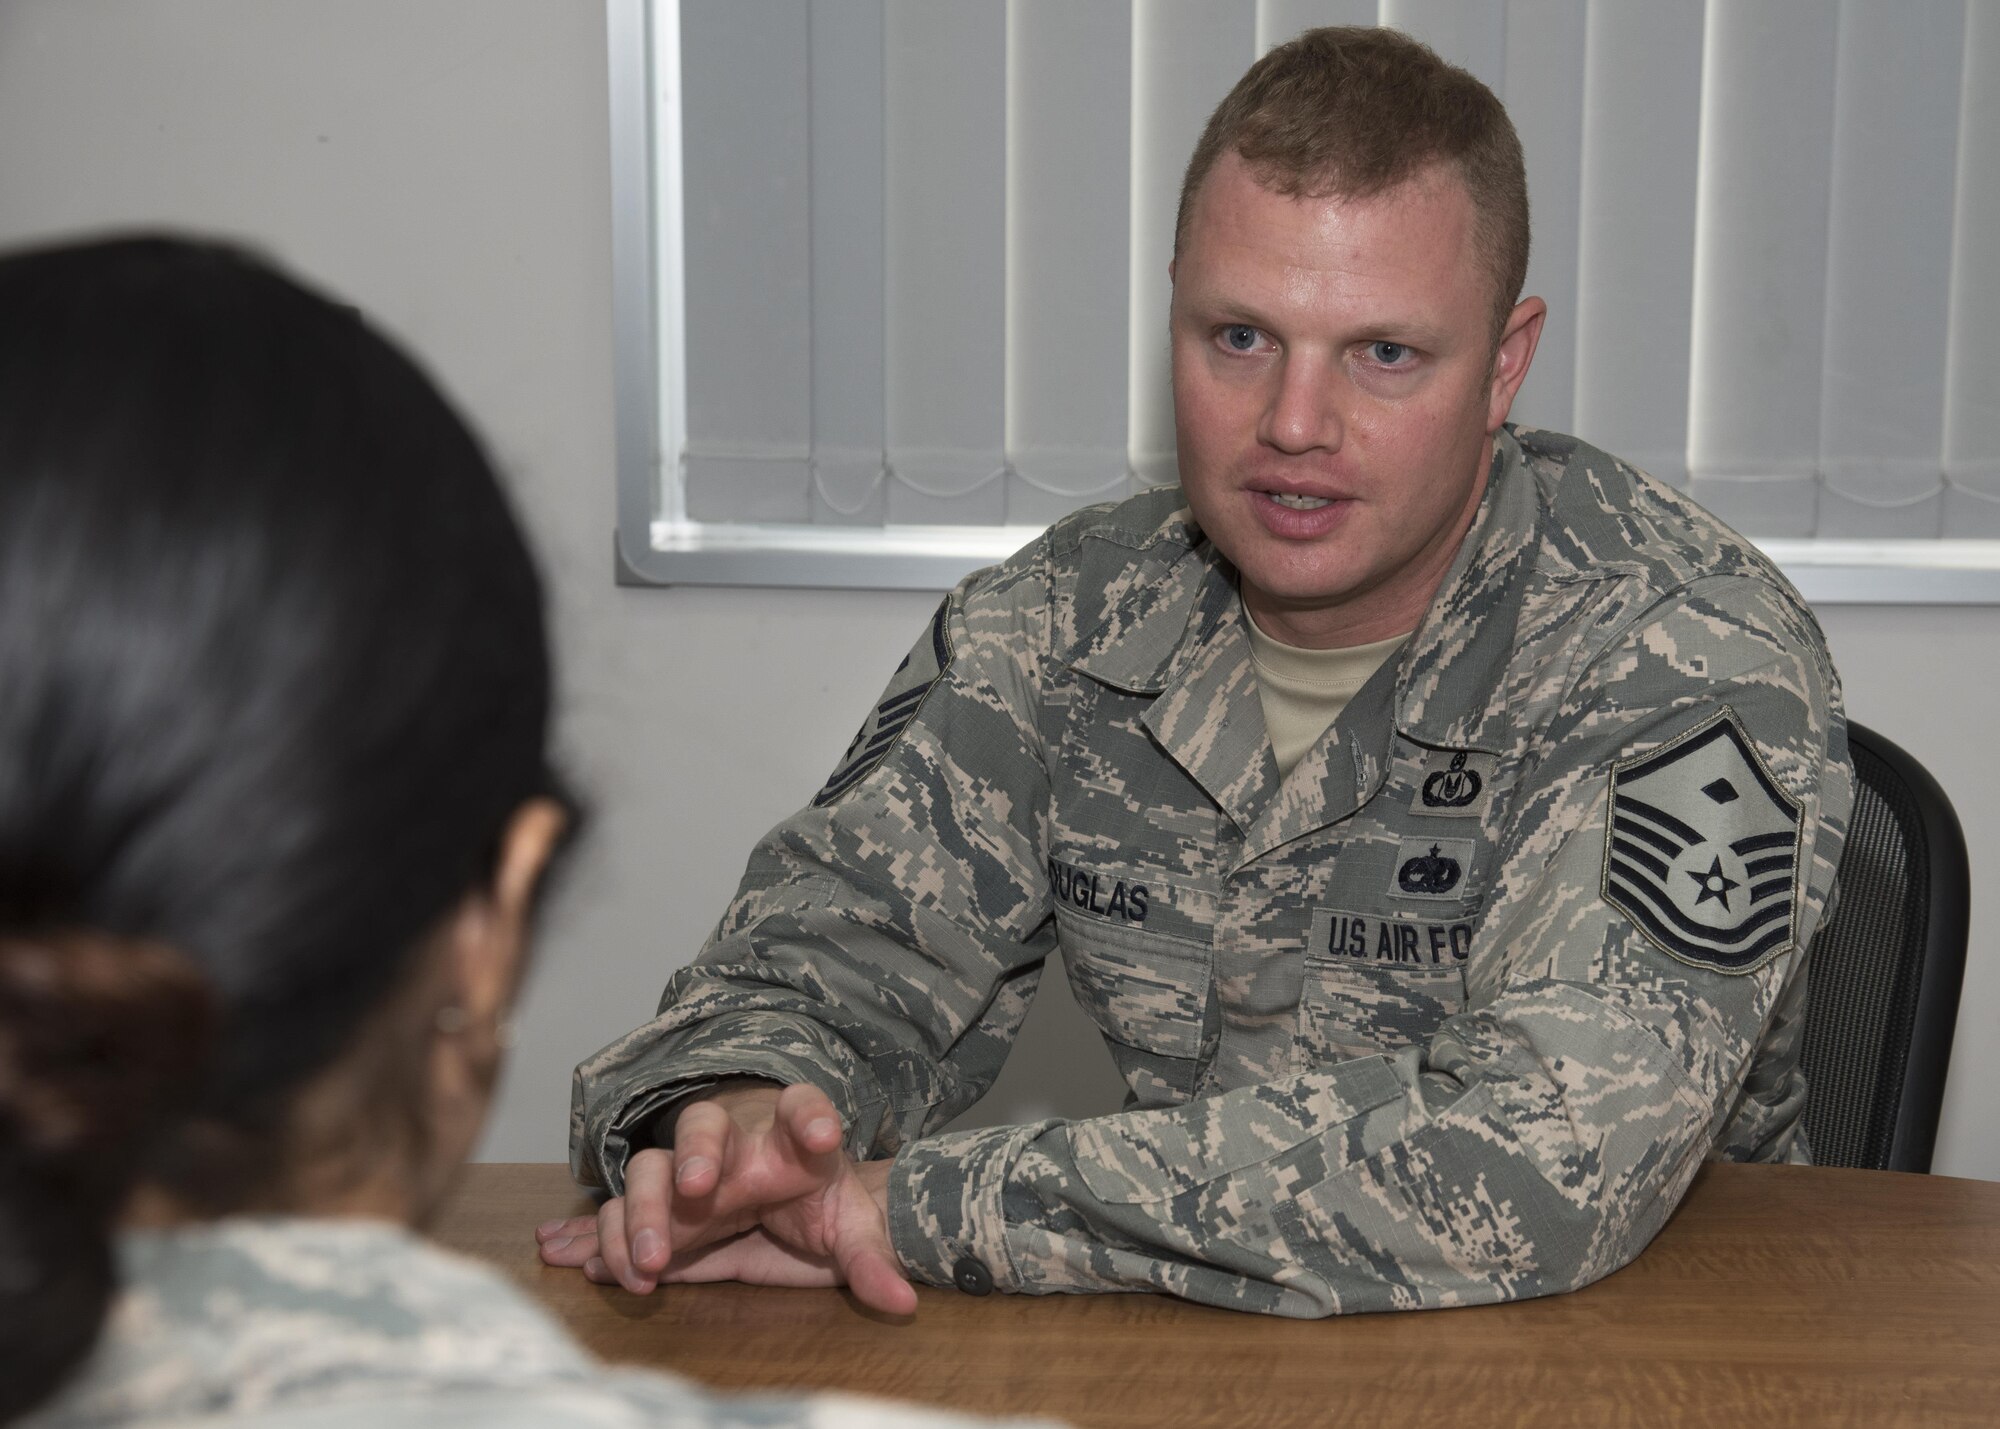 U.S. Air Force Master Sgt. Ryan Douglas, first sergeant, speaks with Staff Sgt. Maria Leal-Reynolds, a command support staff technician, both with the 35th Communications Squadron, about the variety of programs the first sergeants offer to unit personnel at Misawa Air Base, Japan, Sept. 26, 2016. Programs include Operation Warmheart, Safehaven and Veteran of Foreign Wars Unmet Needs, which are emergency relief funds raised by first shirts and other Misawa AB organizations. (U.S. Air Force photo by Airman 1st Class Sadie Colbert)